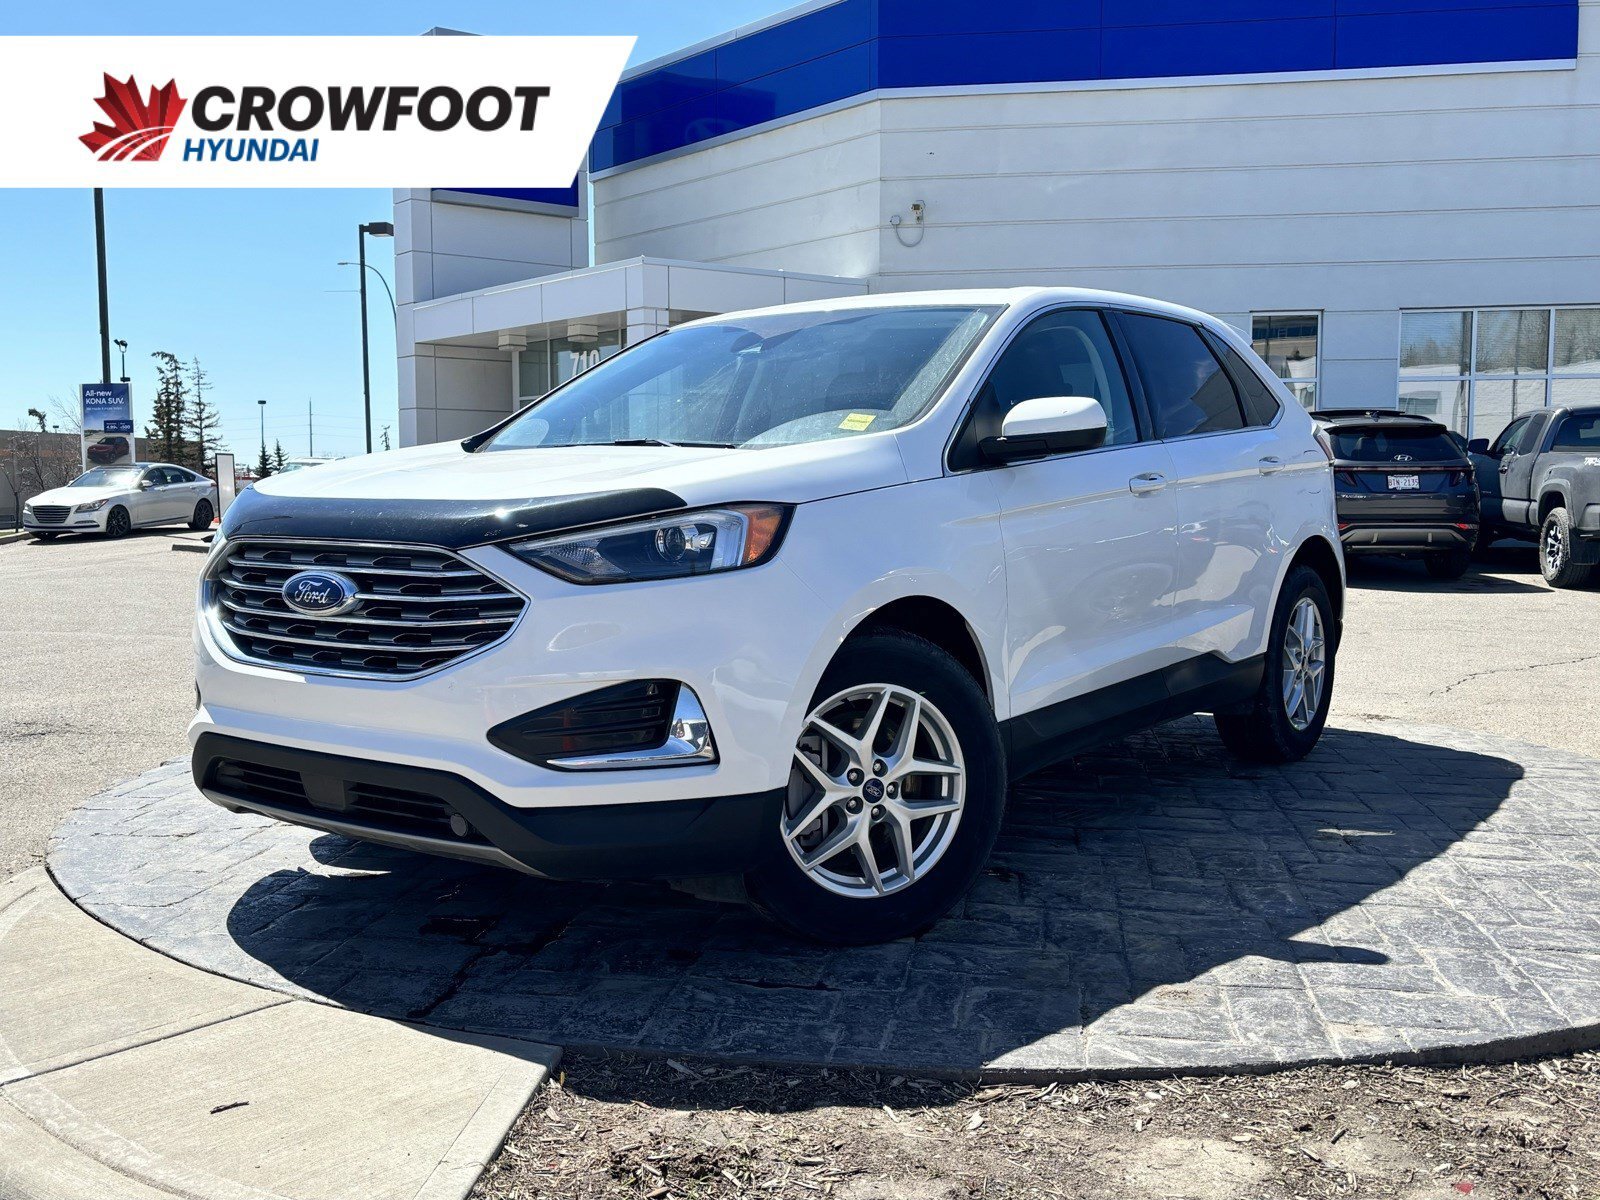 2022 Ford Edge SEL - AWD, No Accidents, 12 Infotainment Display, 